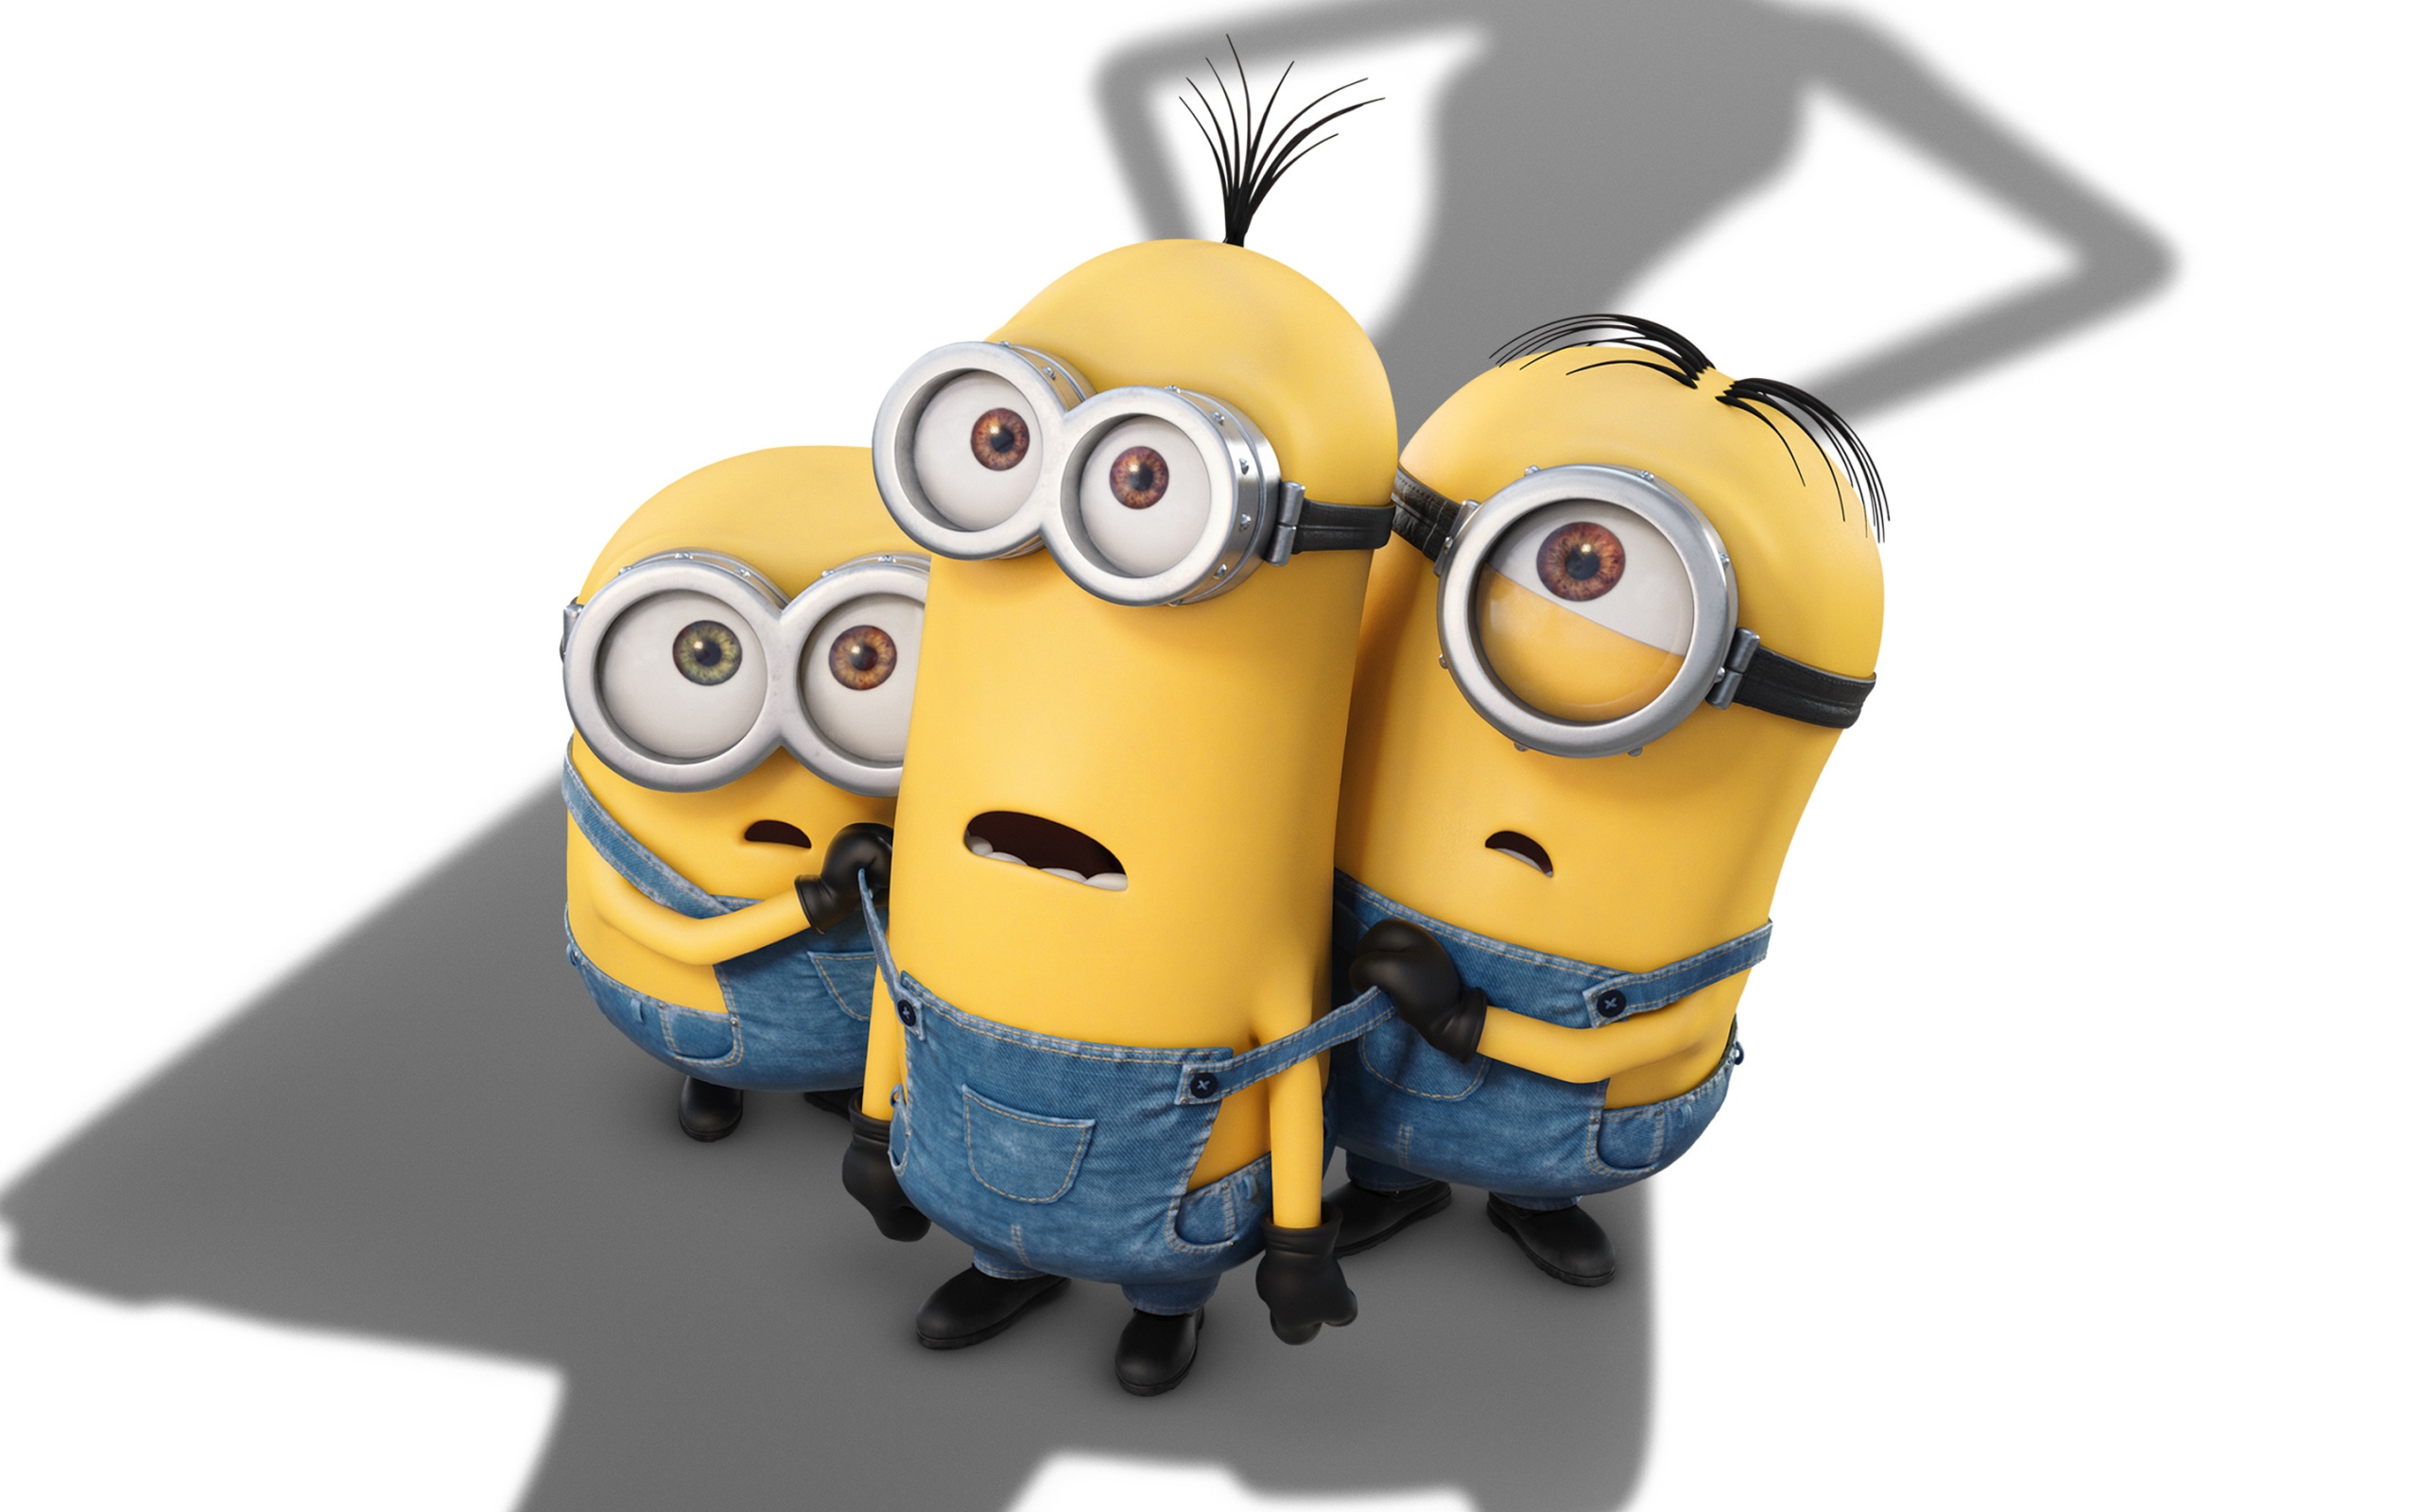 Bob and Kevin Minions in 2015 Best Animated Film Minions wallpaper